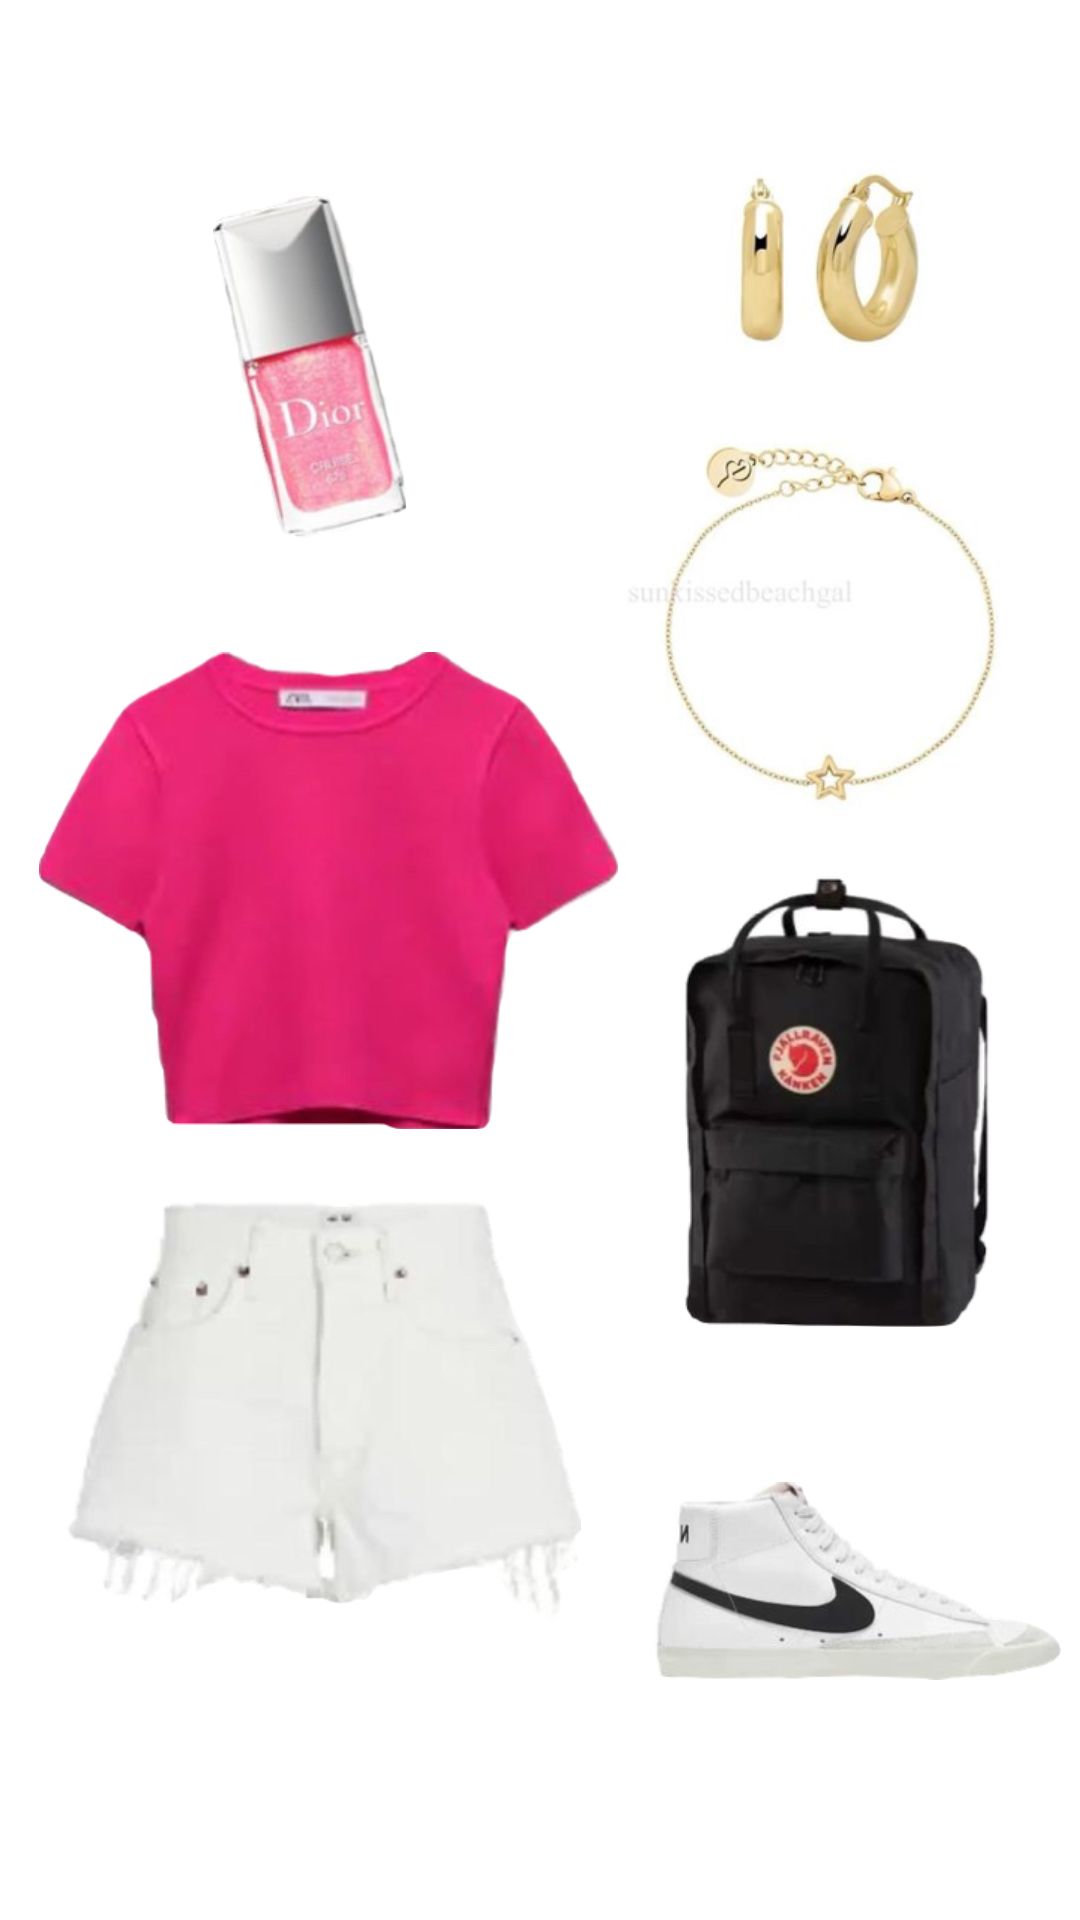 Amazing Polyvore Outfits Ideas